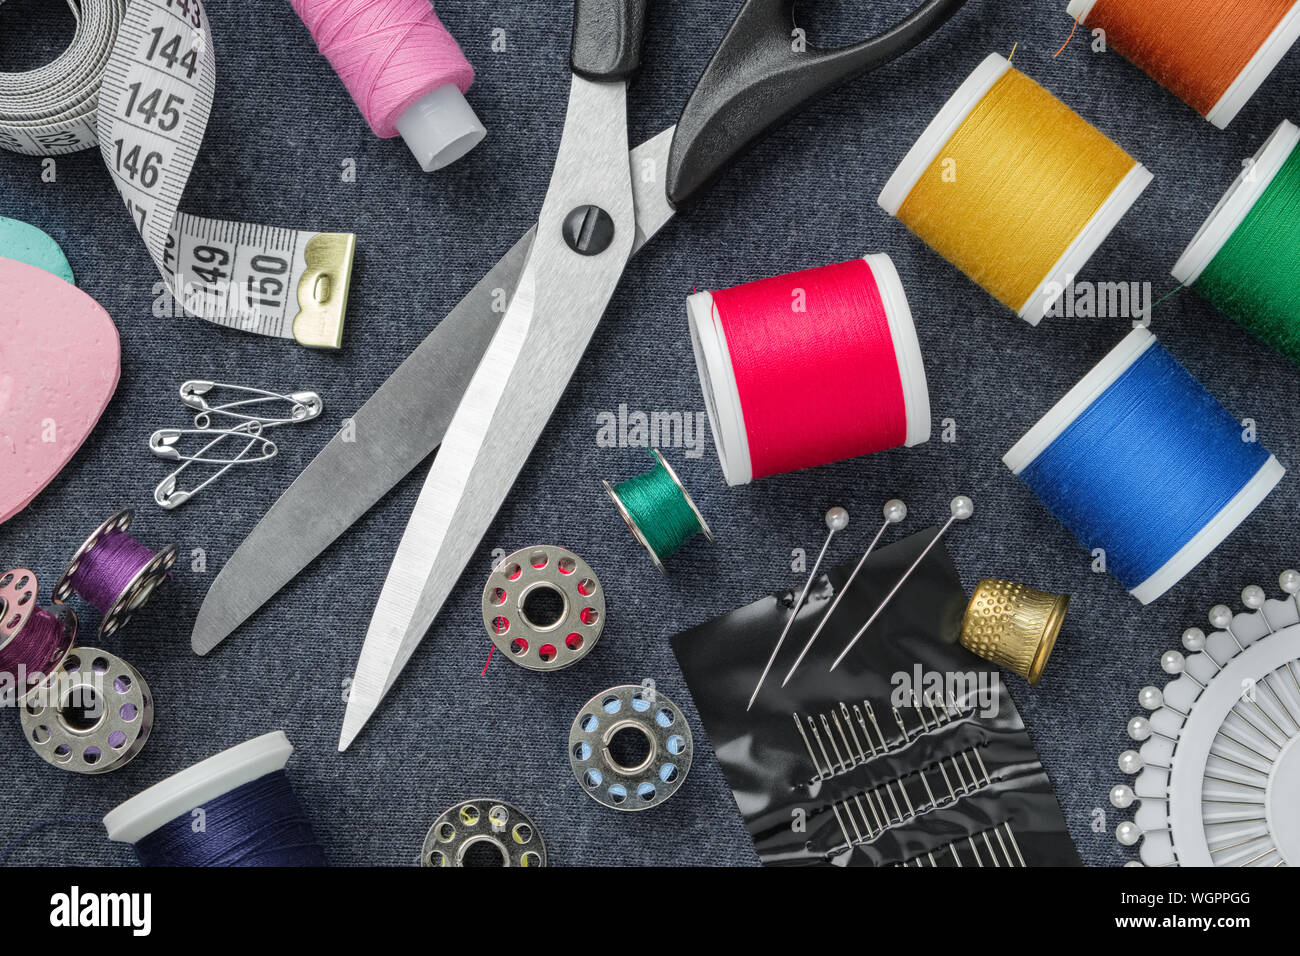 Sewing items: tailoring scissors, measuring tape, thimble, spools of  thread, including pins, needles and sewing accessories on sewing cloth.  View from Stock Photo - Alamy